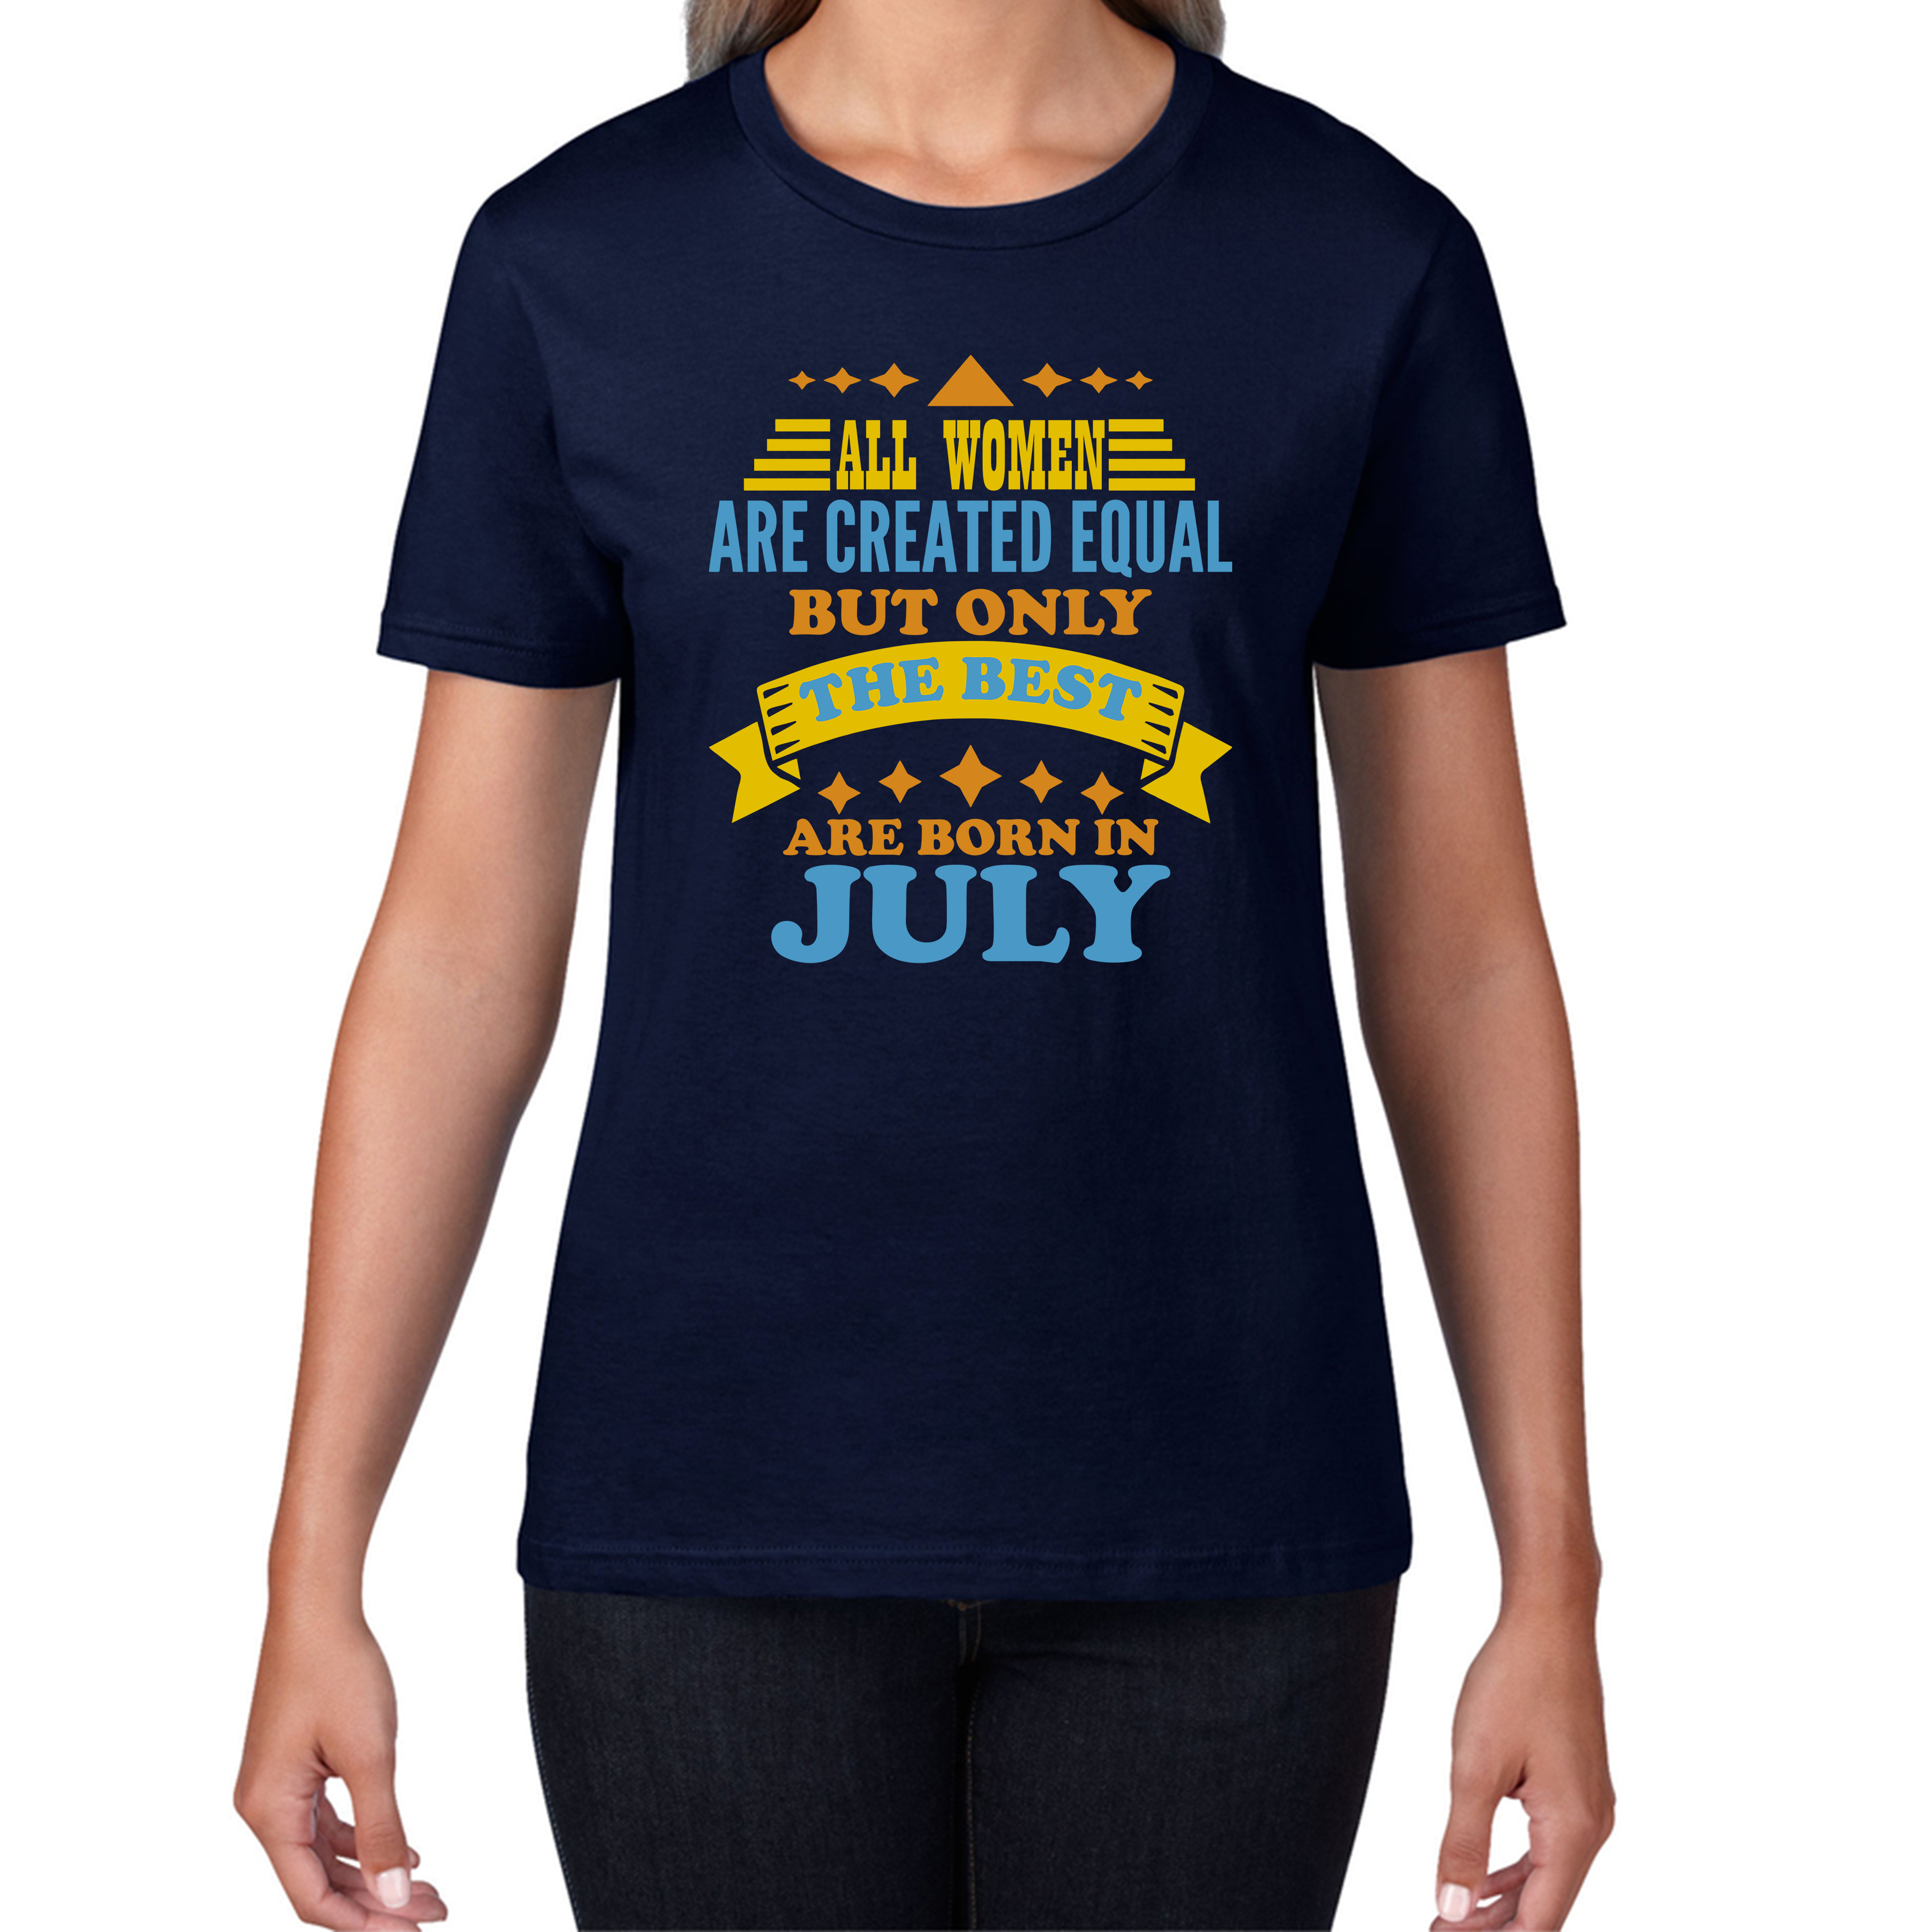 All Women Are Created Equal But Only The Best Are Born In July Funny Birthday Quote Womens Tee Top